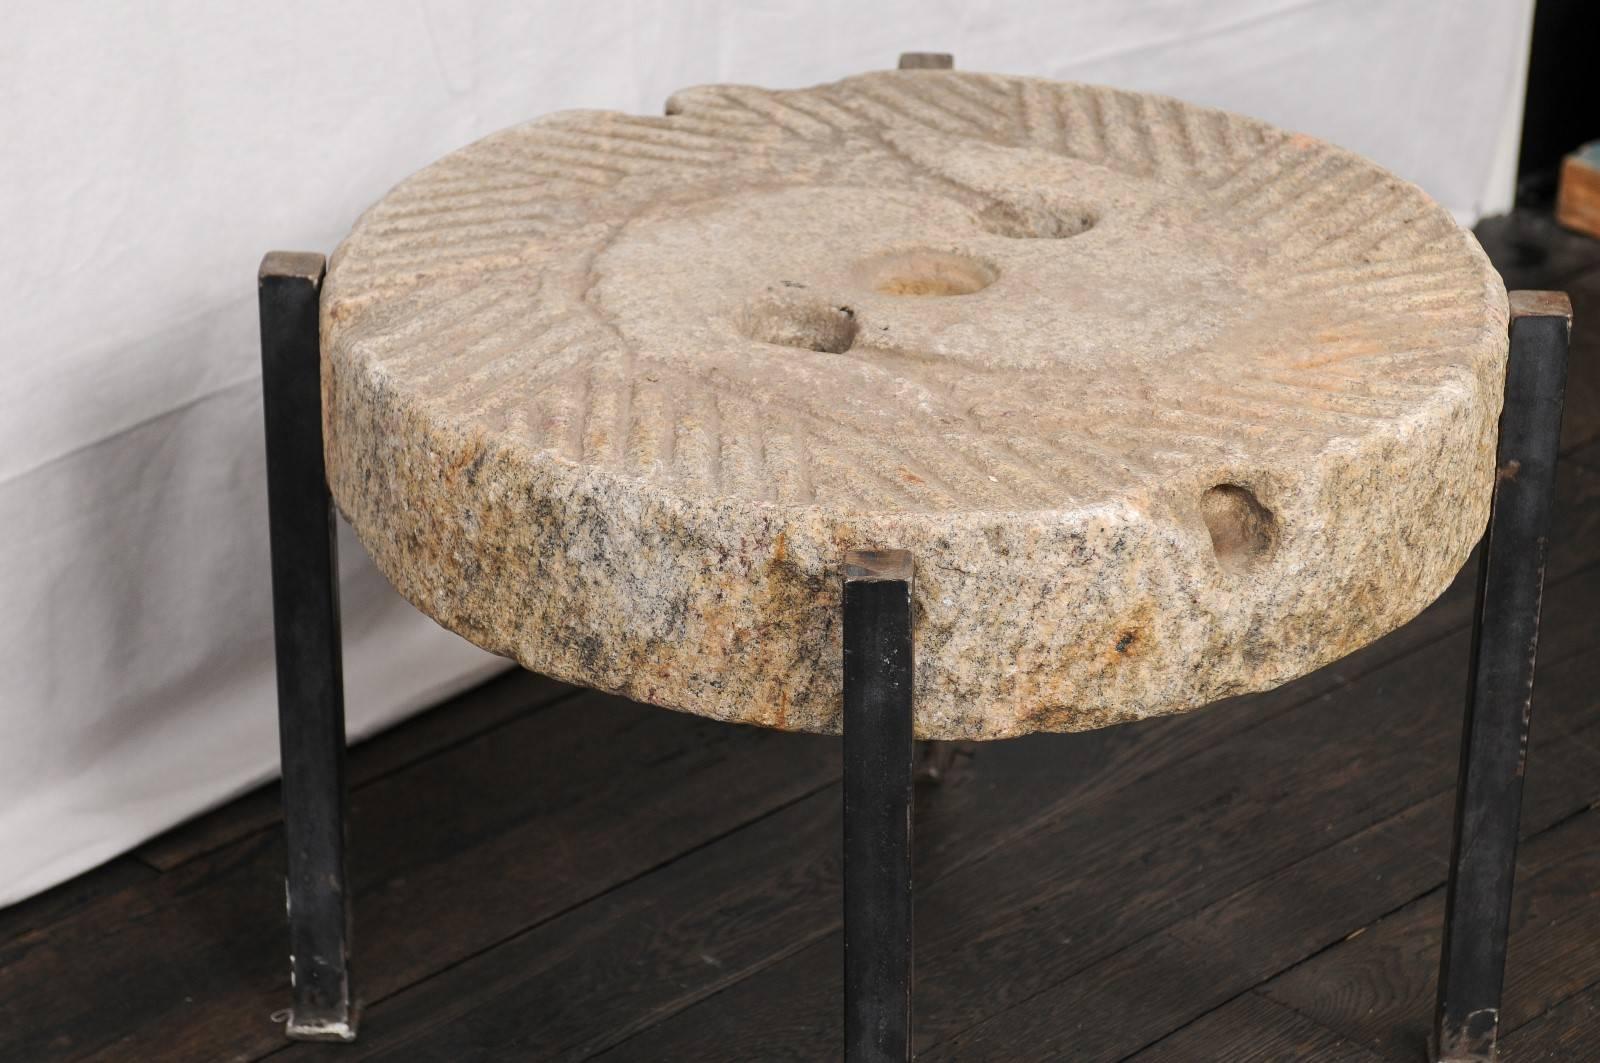 Stone 19th Century European Millstone Grinding Surface Made Drink Table on Iron Base